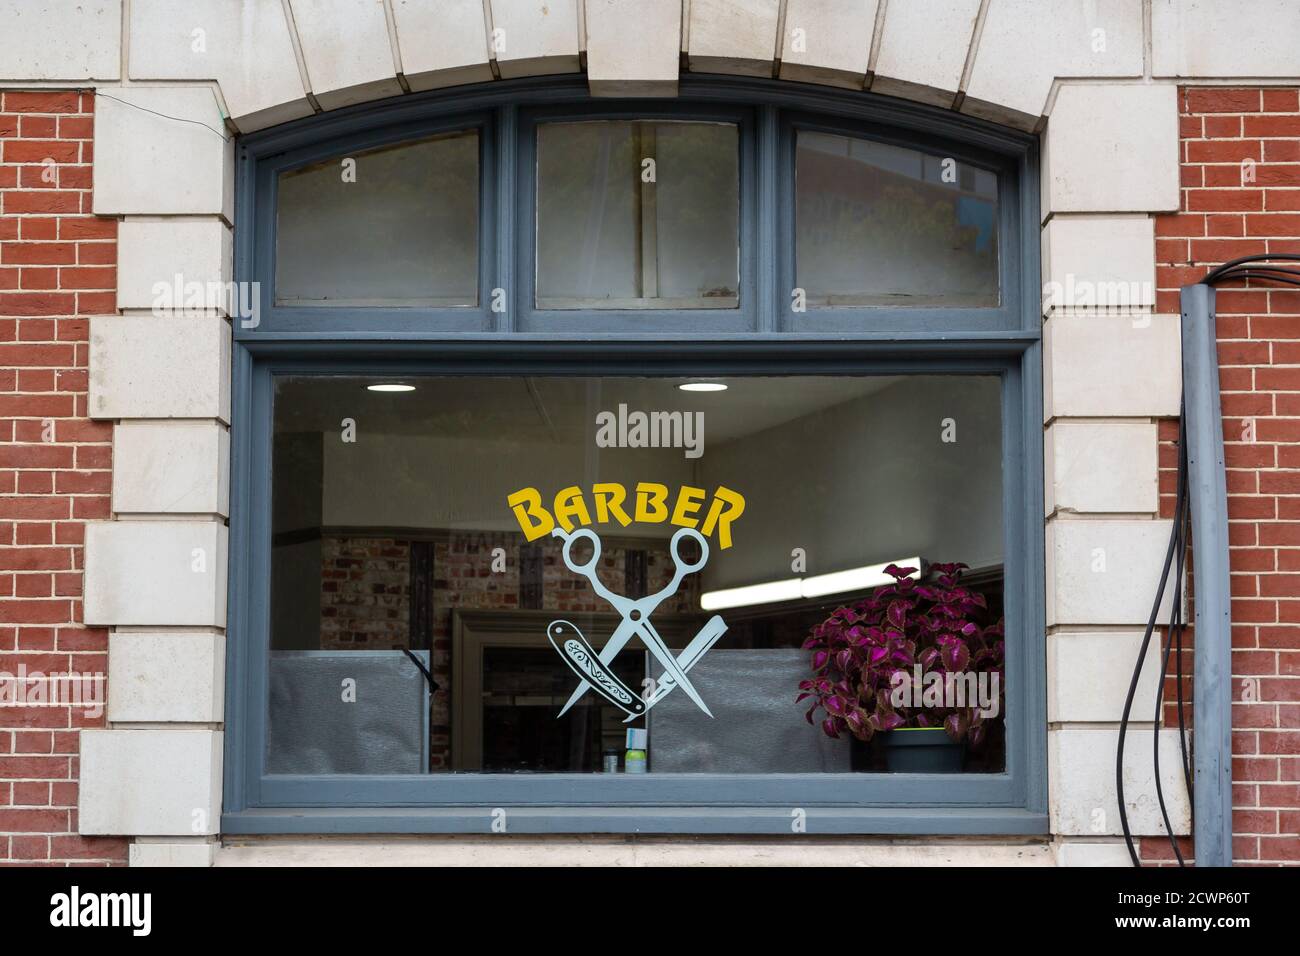 The window of a barber shop Stock Photo